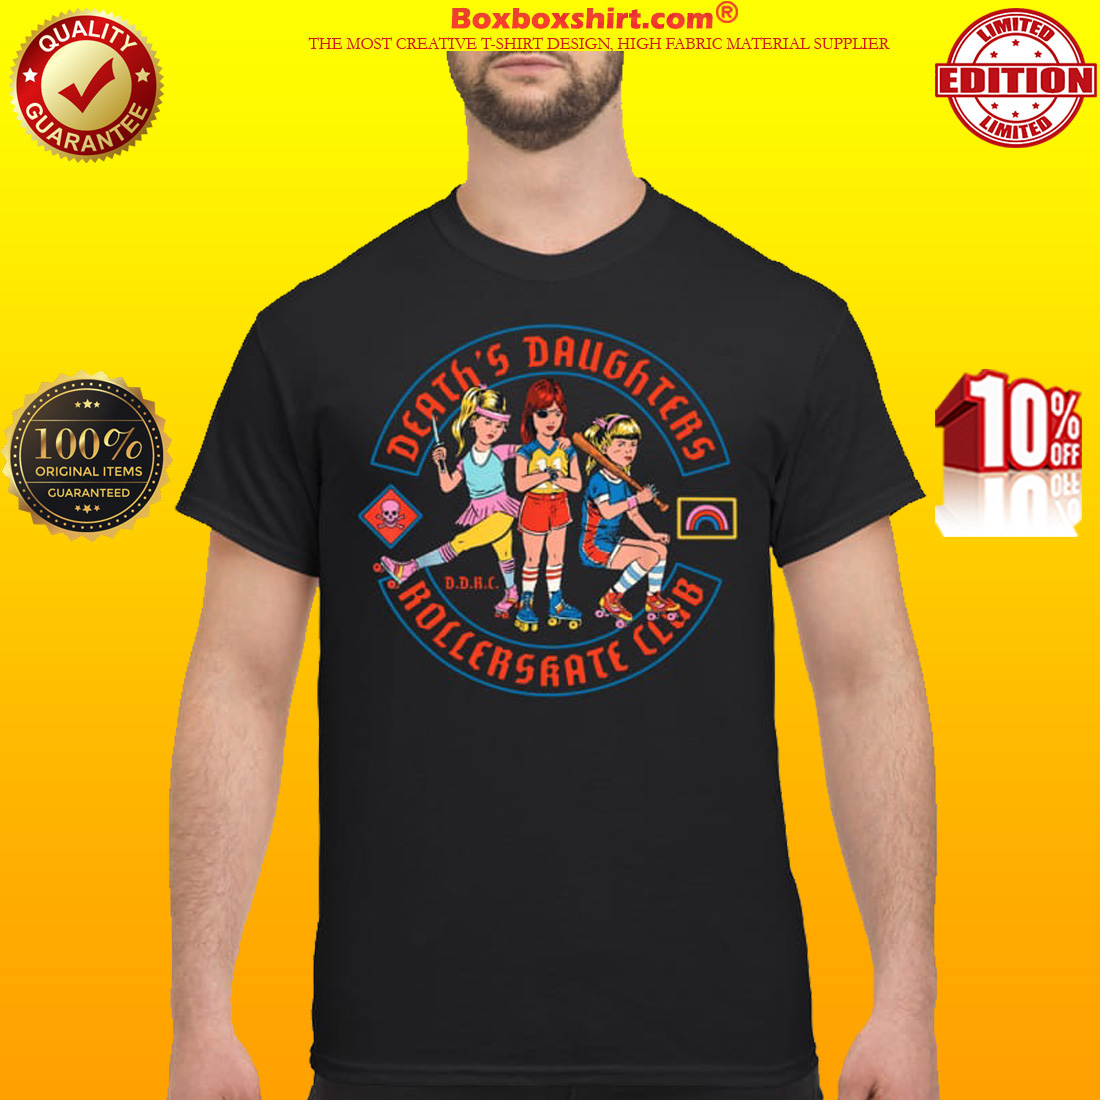 Death's daughters roller skate club classic shirt